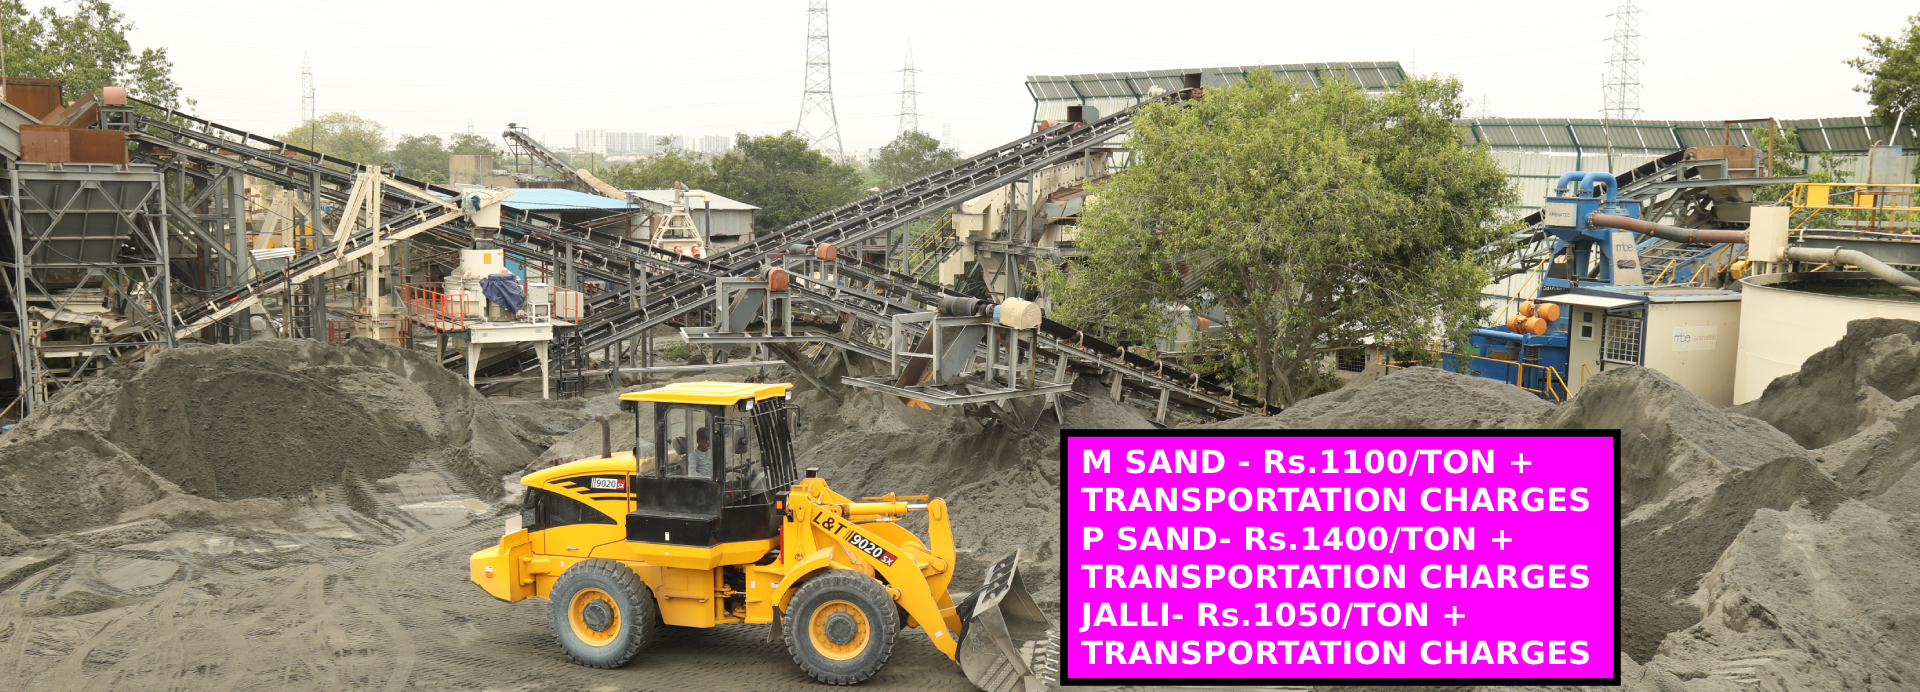 Double Washed M Sand in Chennai